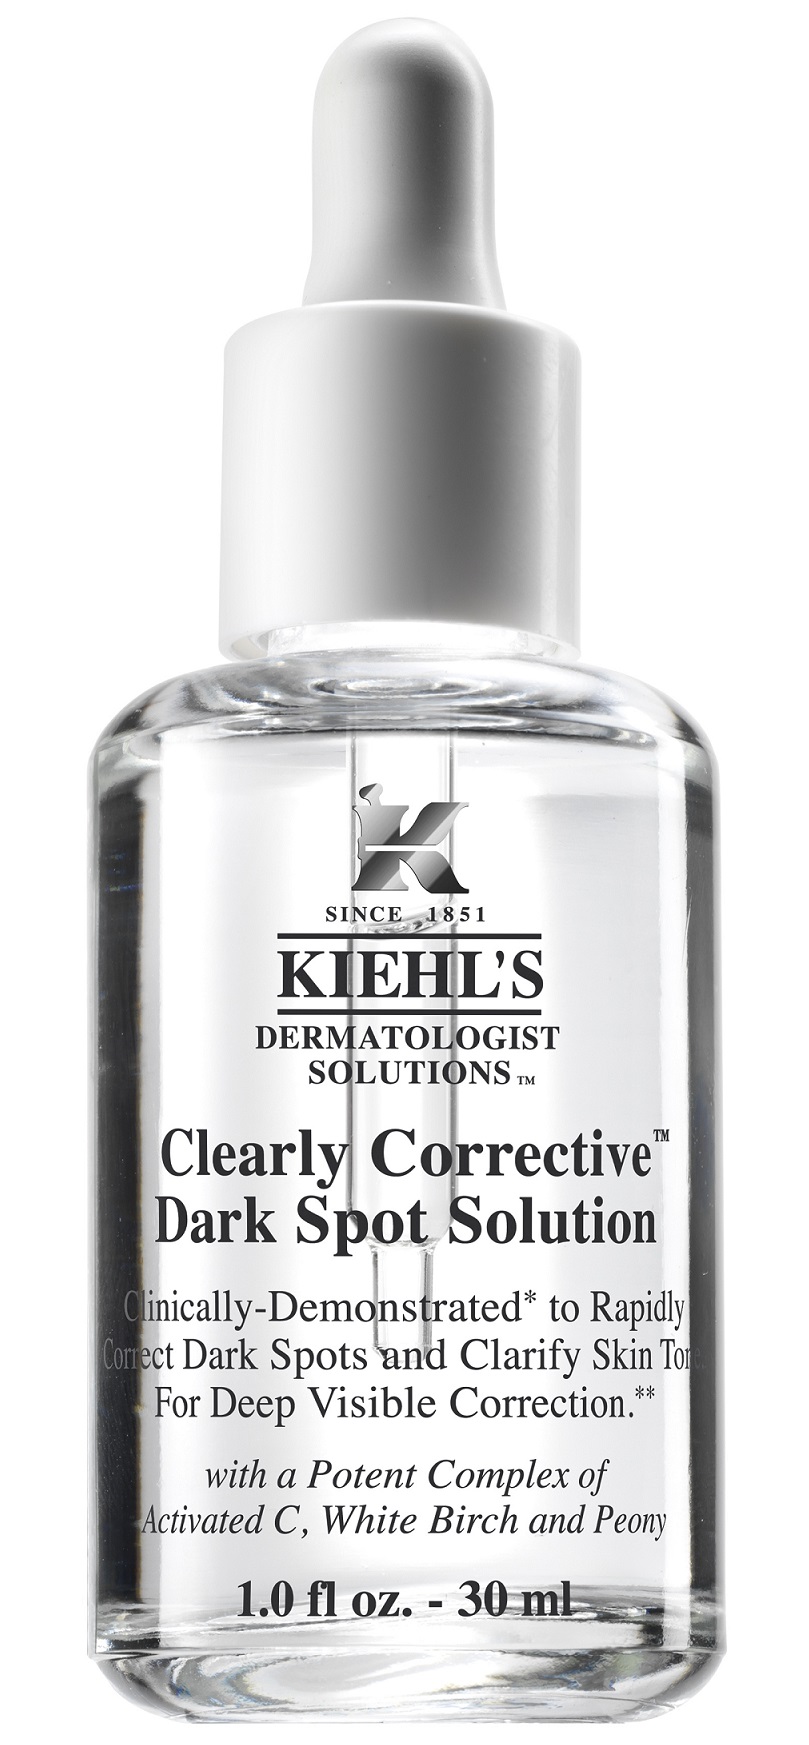 Kiehl's Clearly Corrective Dark Spot Solution, RM230 (30ml)-Pamper.my